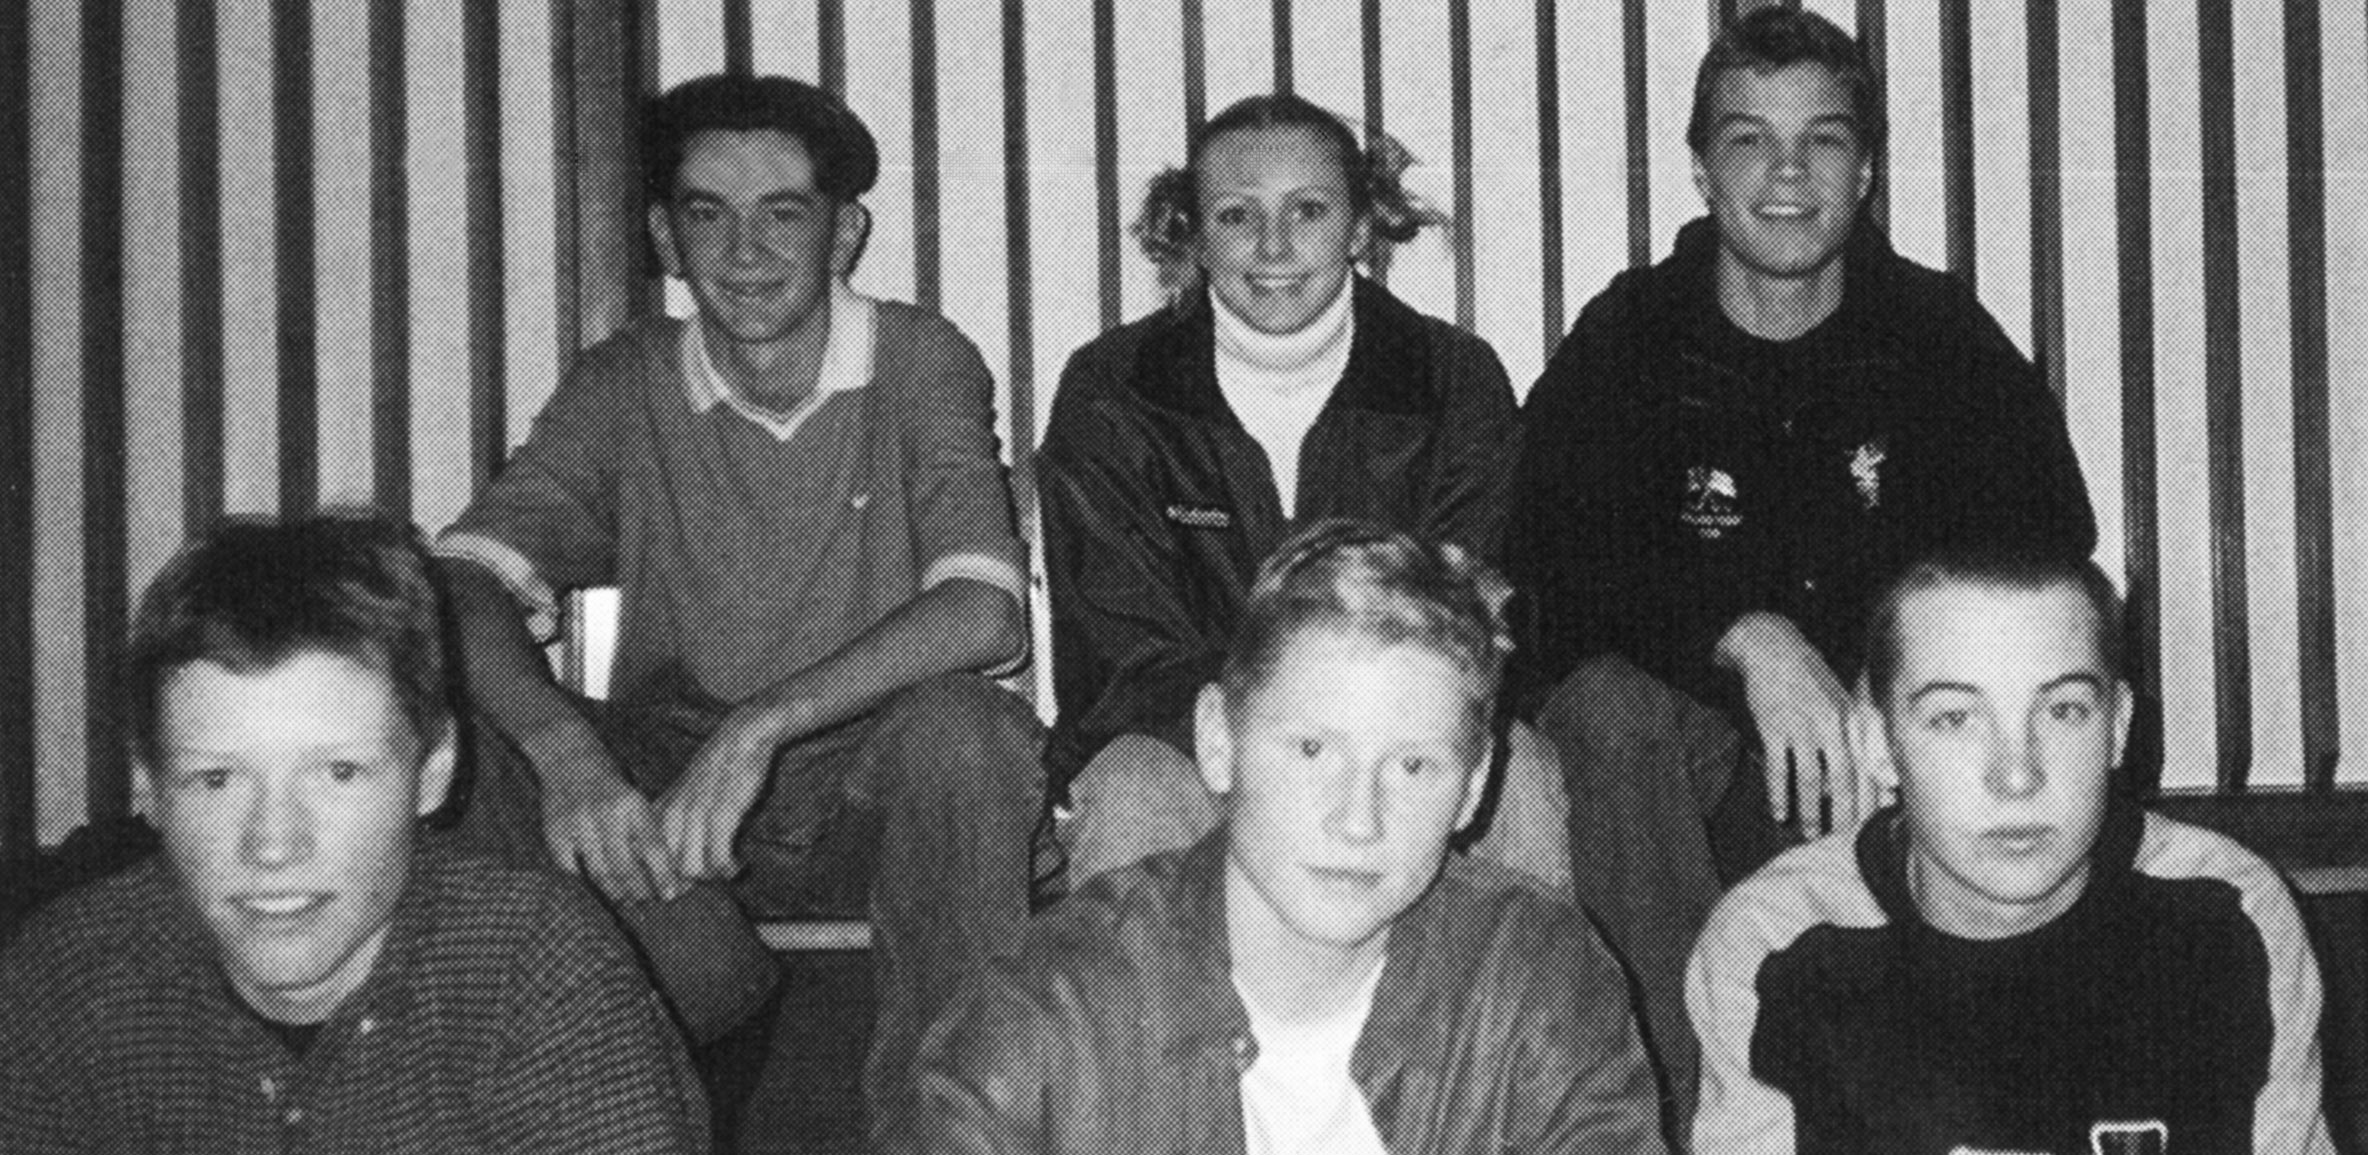 (Click to magnify) FRONT ROW: Jacob Scriven, Michael Scriven, Brent Mills; ***SECOND ROW: Jacob Duckworth, Krysta Couperthwaite, Mike Boyce.